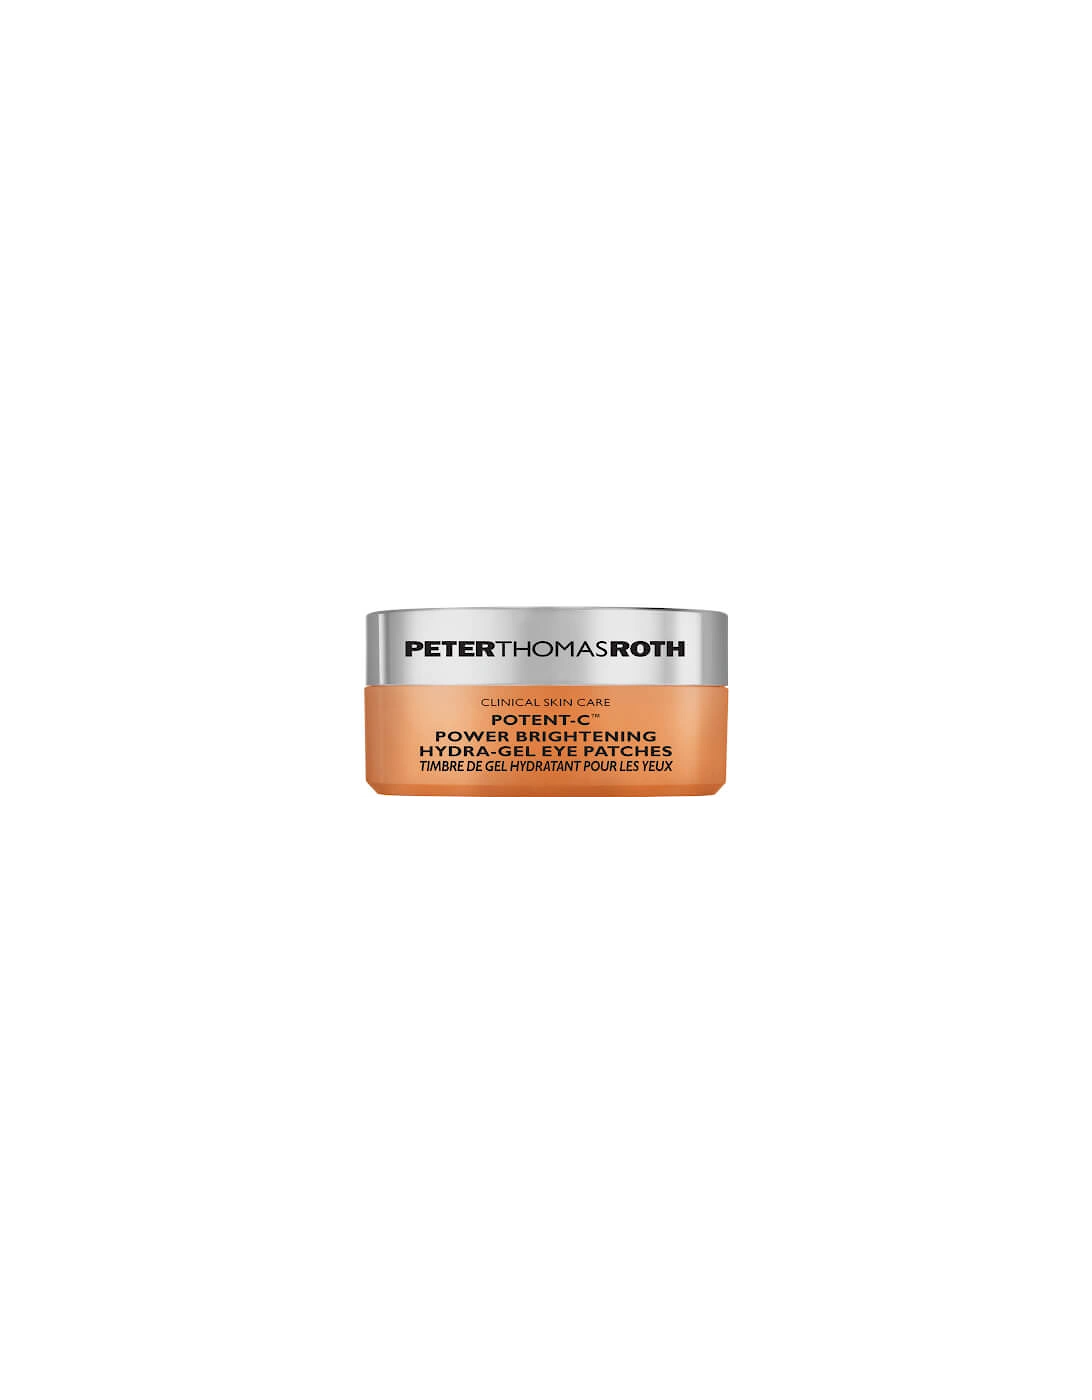 Potent-C Power Brightening Hydra-Gel Eye Patches 172g - Peter Thomas Roth, 2 of 1